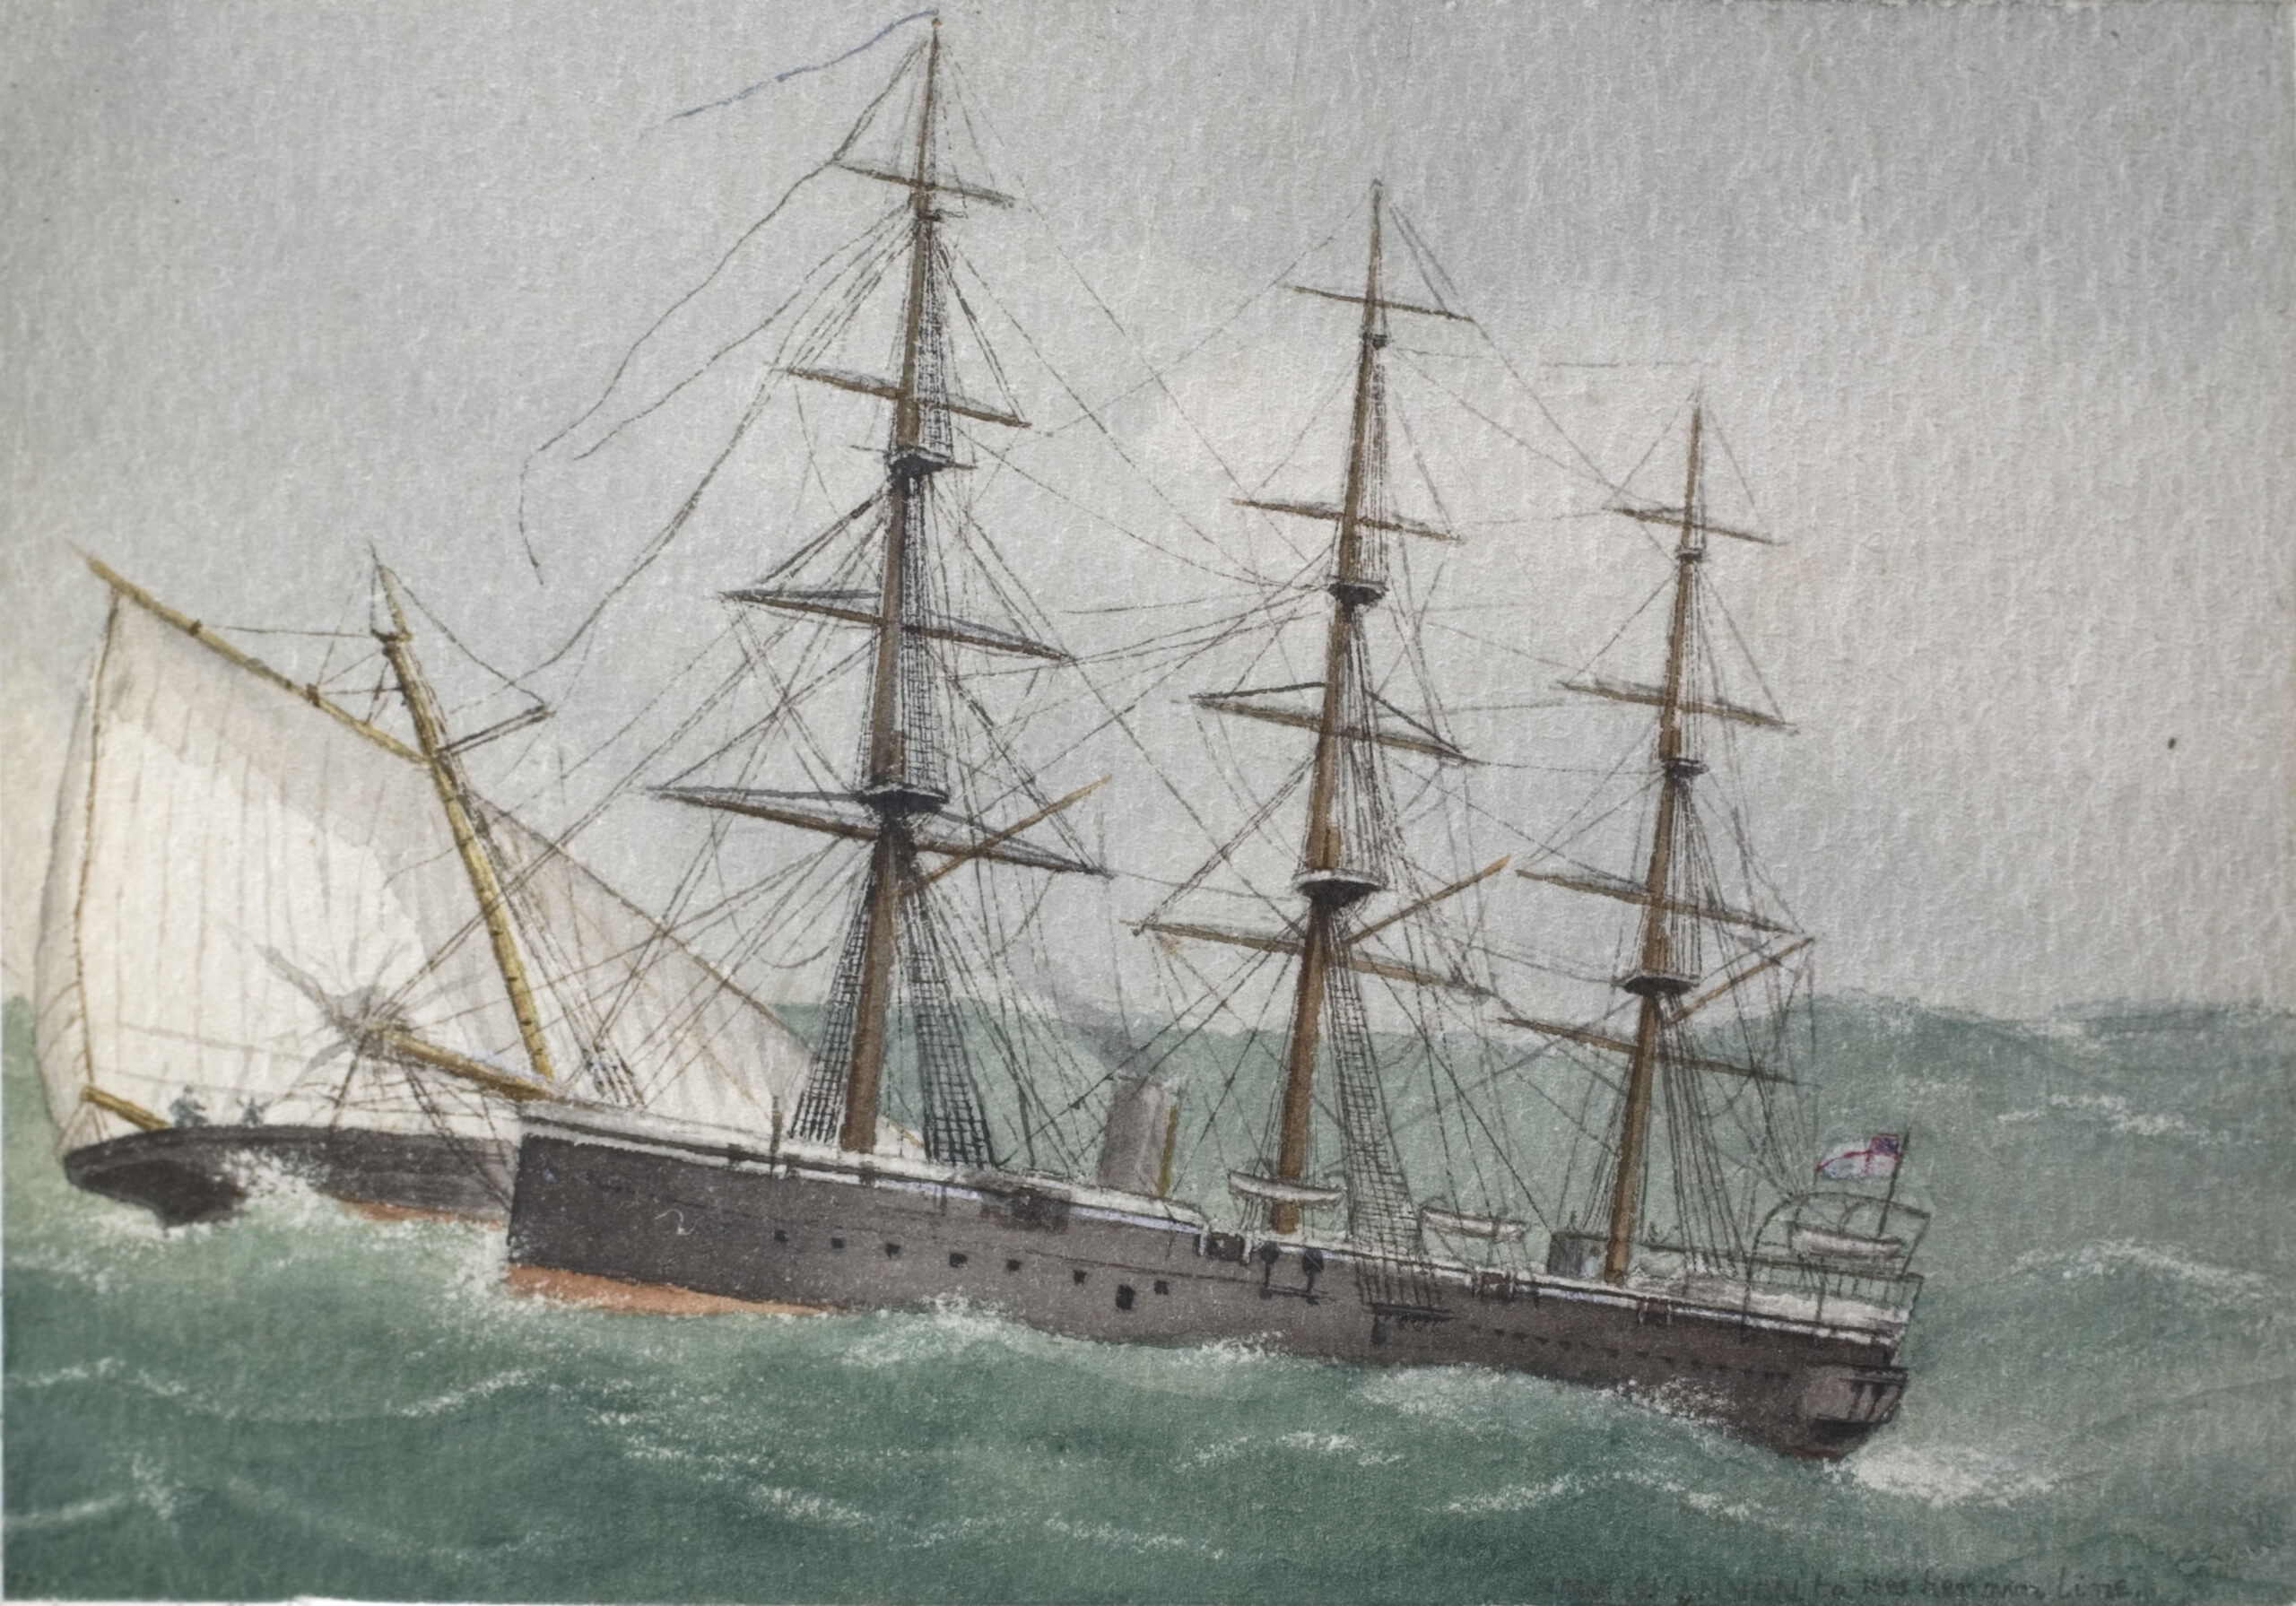 These watercolours were found in the back of a log book belonging to John de Robeck. He began his naval career at 13, went on to command allied forces during WWI and ultimately became Admiral of the Fleet in 1925. DRBK 3/37